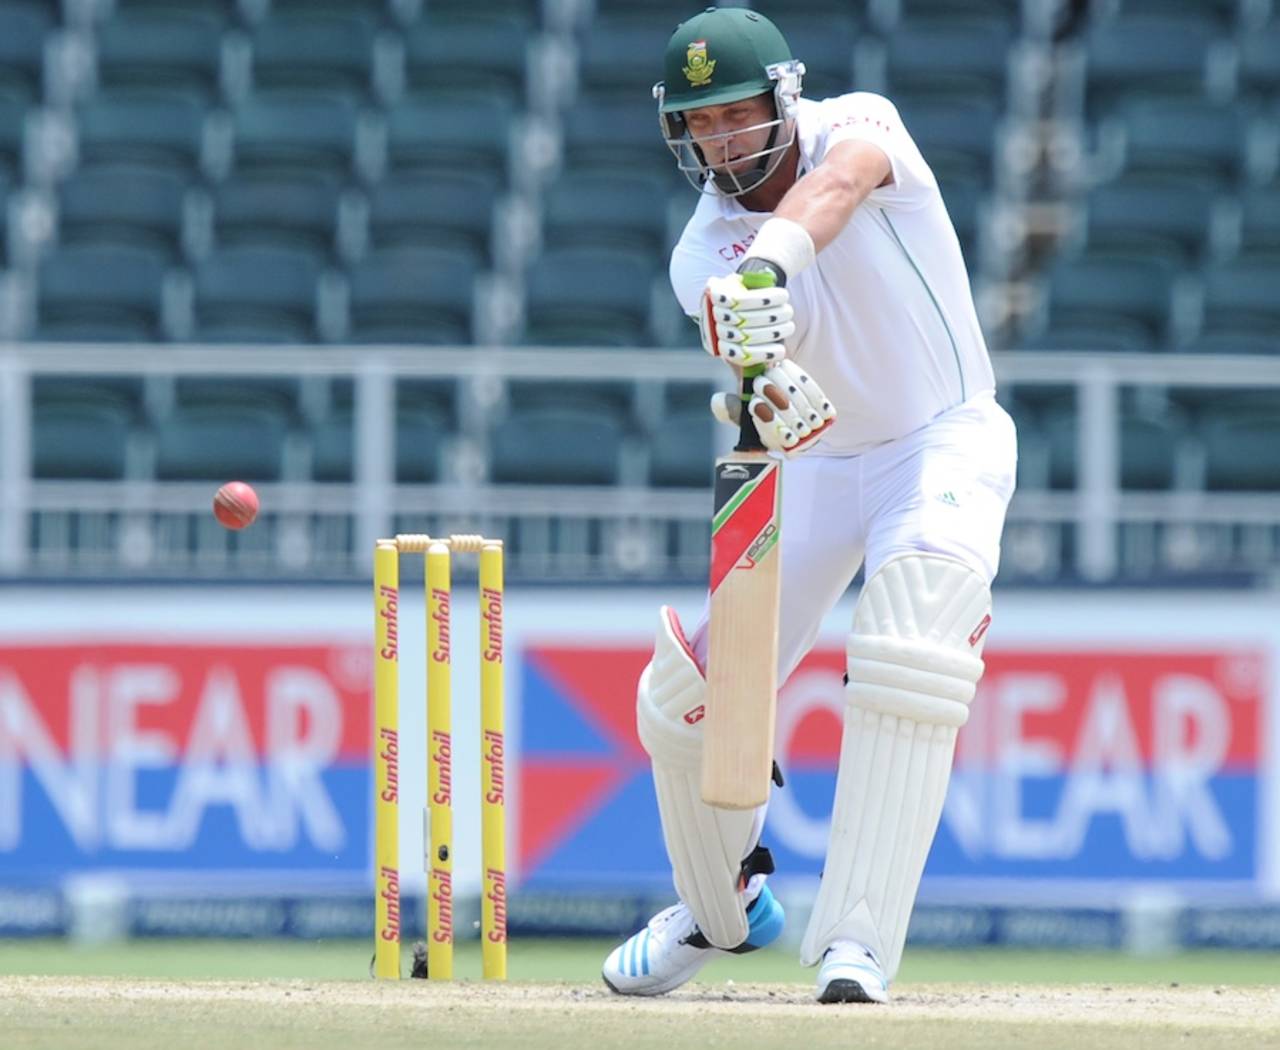 Jacques Kallis faced an average of 127 balls per innings in India, among the most by a South Africa batsman&nbsp;&nbsp;&bull;&nbsp;&nbsp;AFP